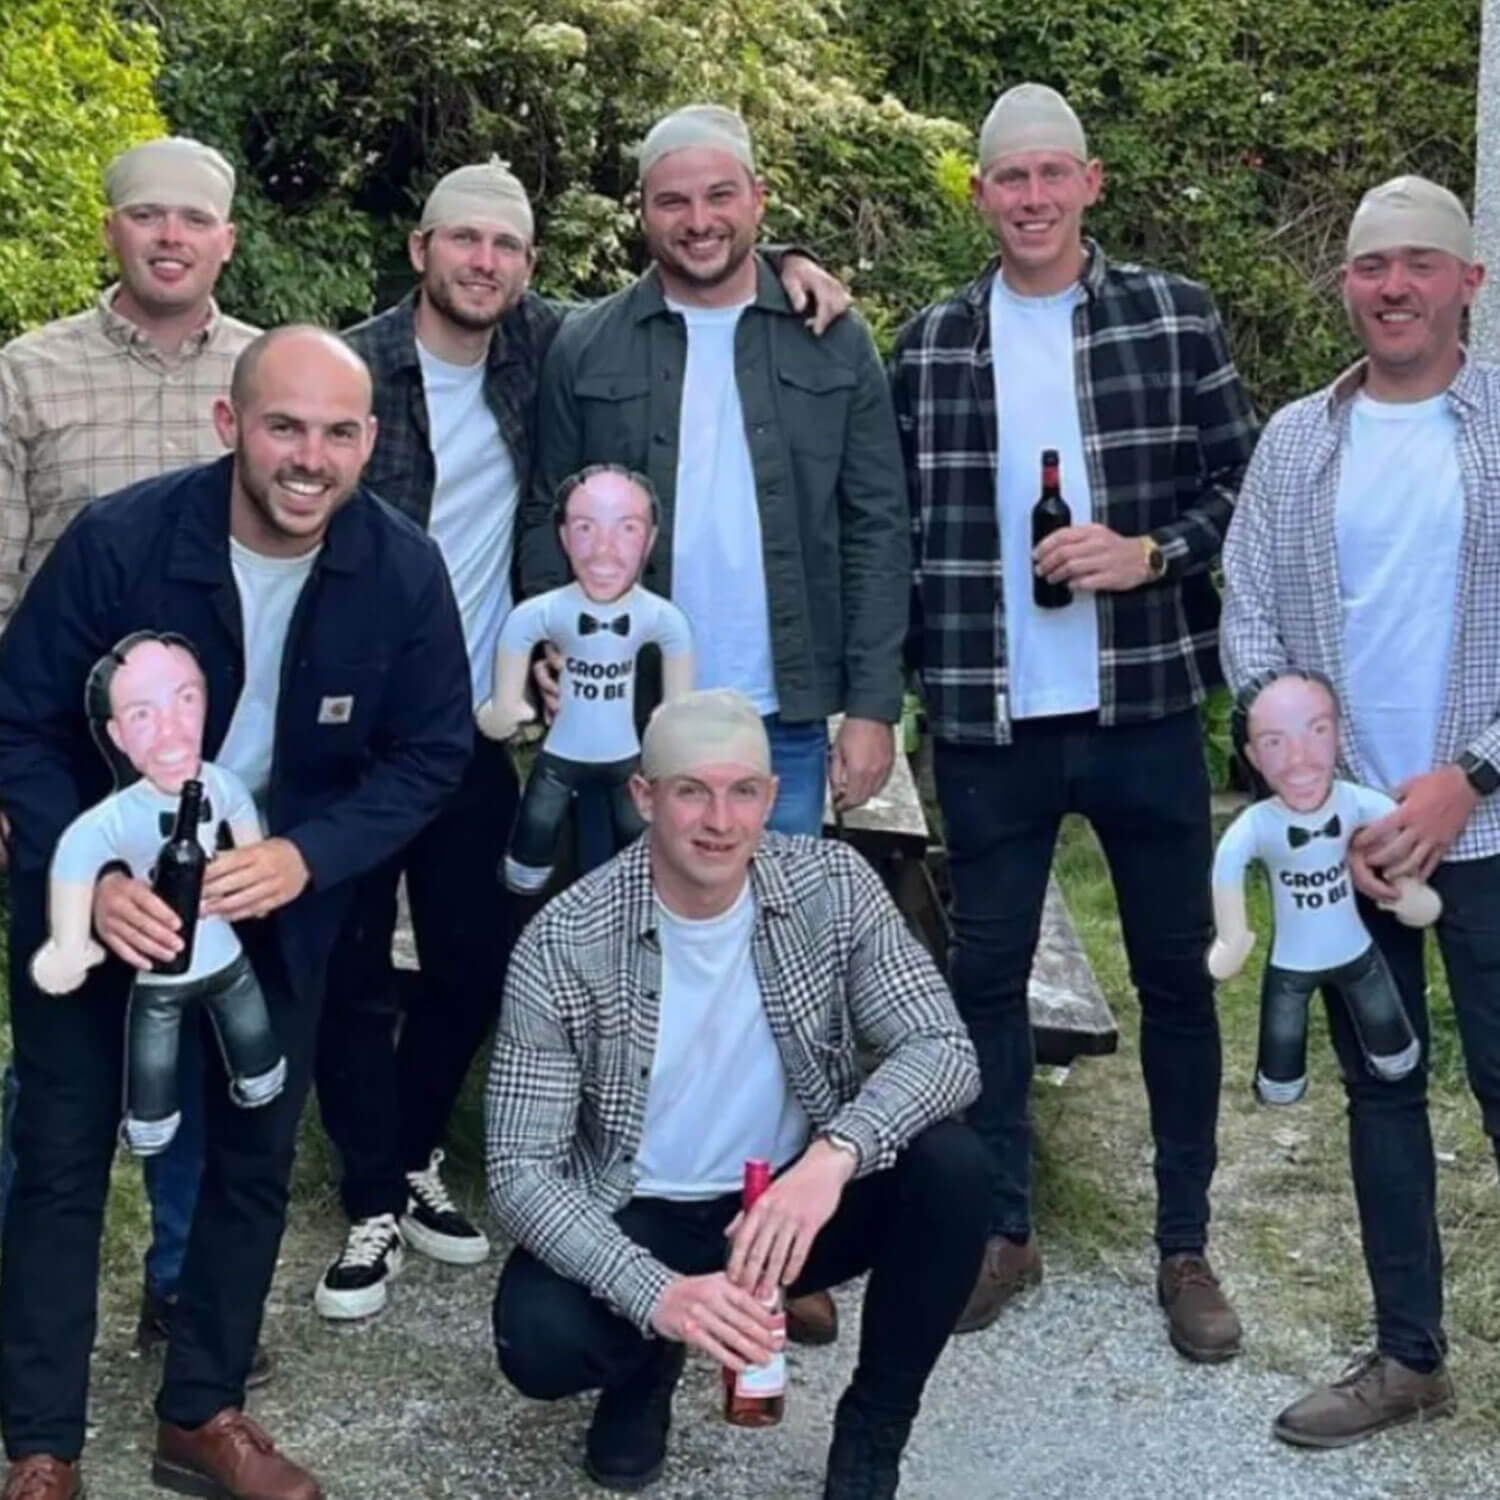 Groom to Be Blow Up Doll